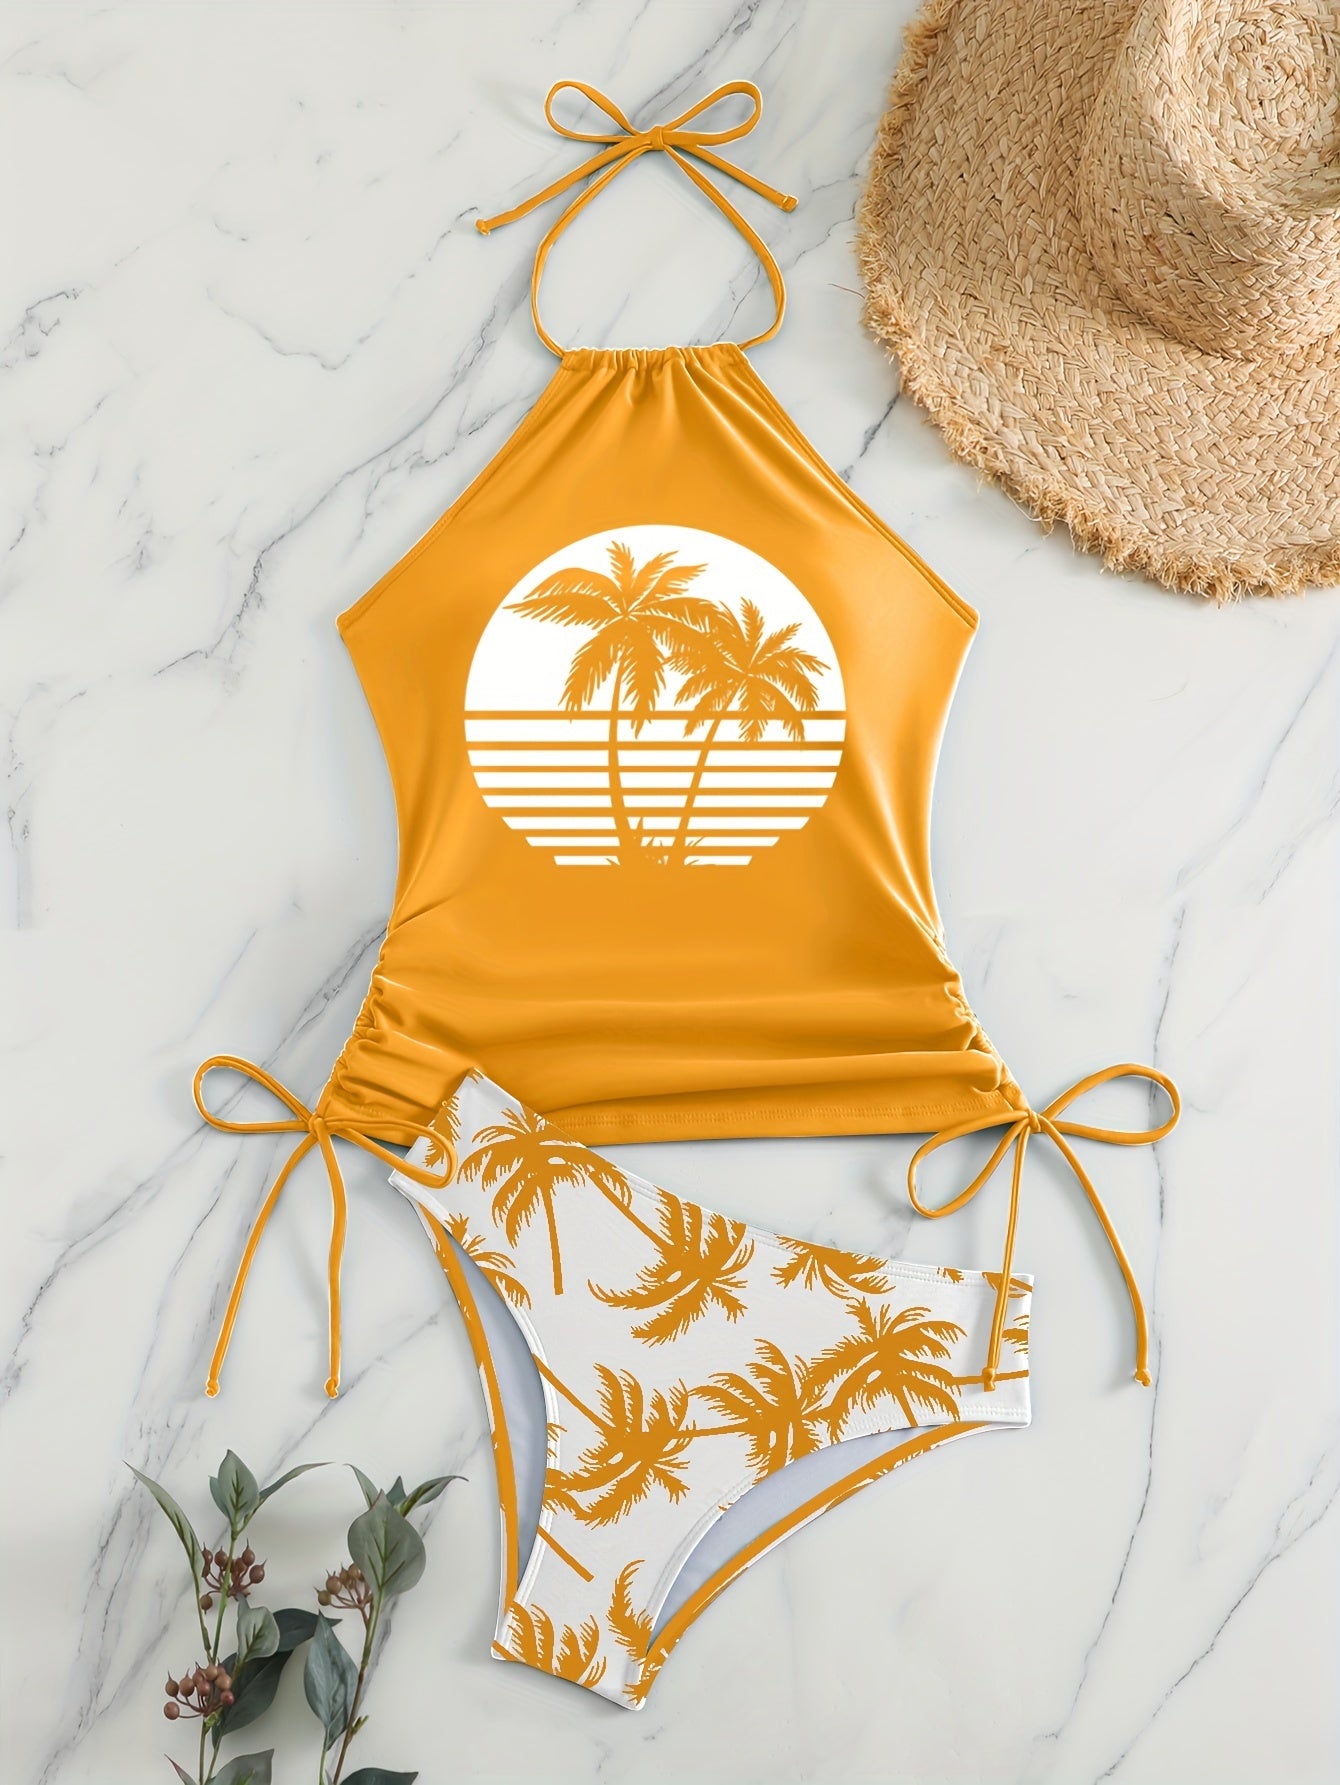 Coconut Tree Sunset Pattern Drawstring 2 Piece Set Swimsuit, Halter Tie Neck Backless Stretchy Low Waist Bathing Suit For Beach Pool, Women's Swimwear & Clothing